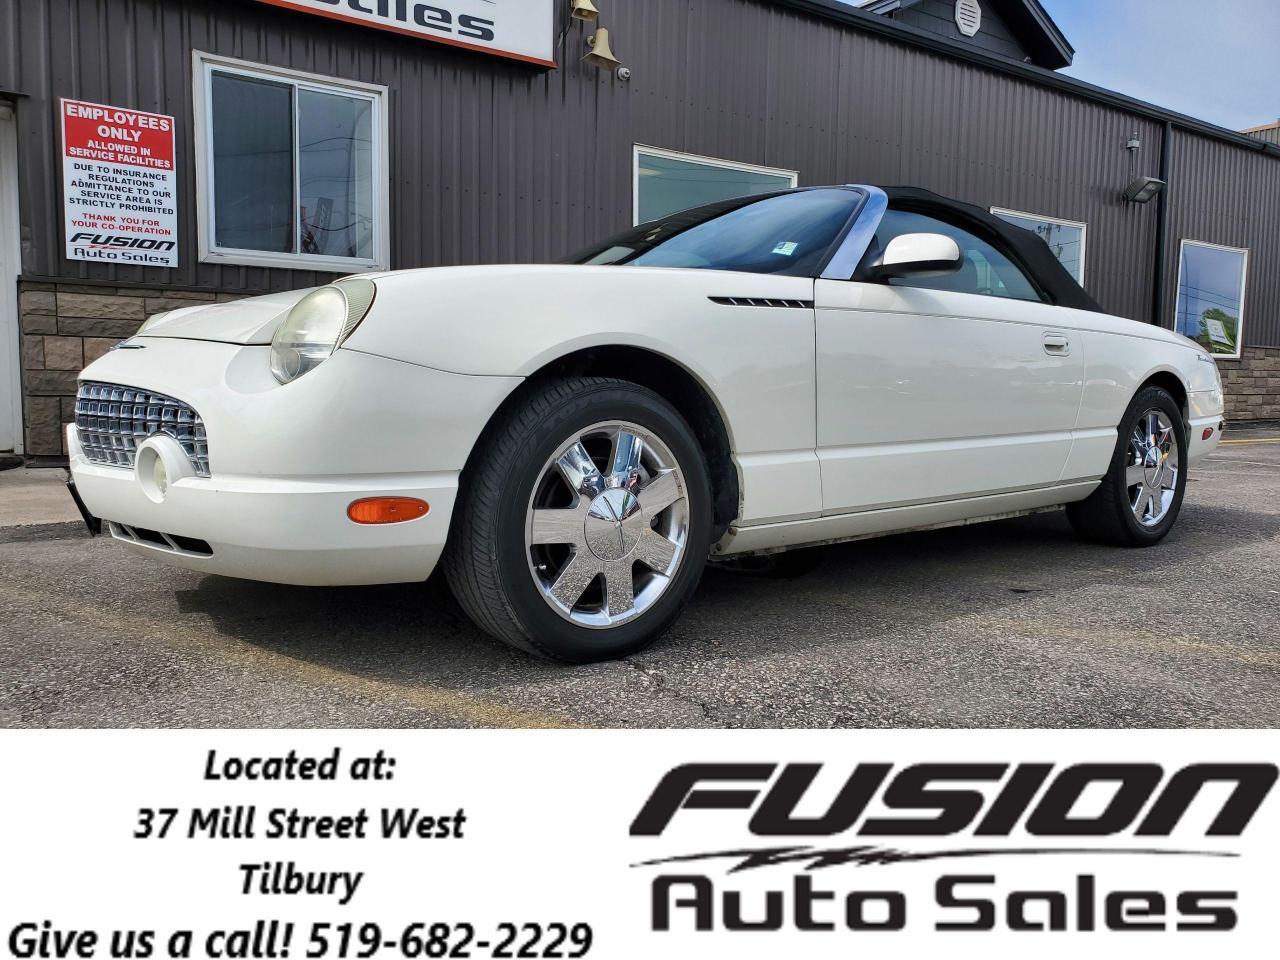 2002 Ford Thunderbird 2dr Conv-NO HST TO A MAX OF $2000 LTD TIME ONLY